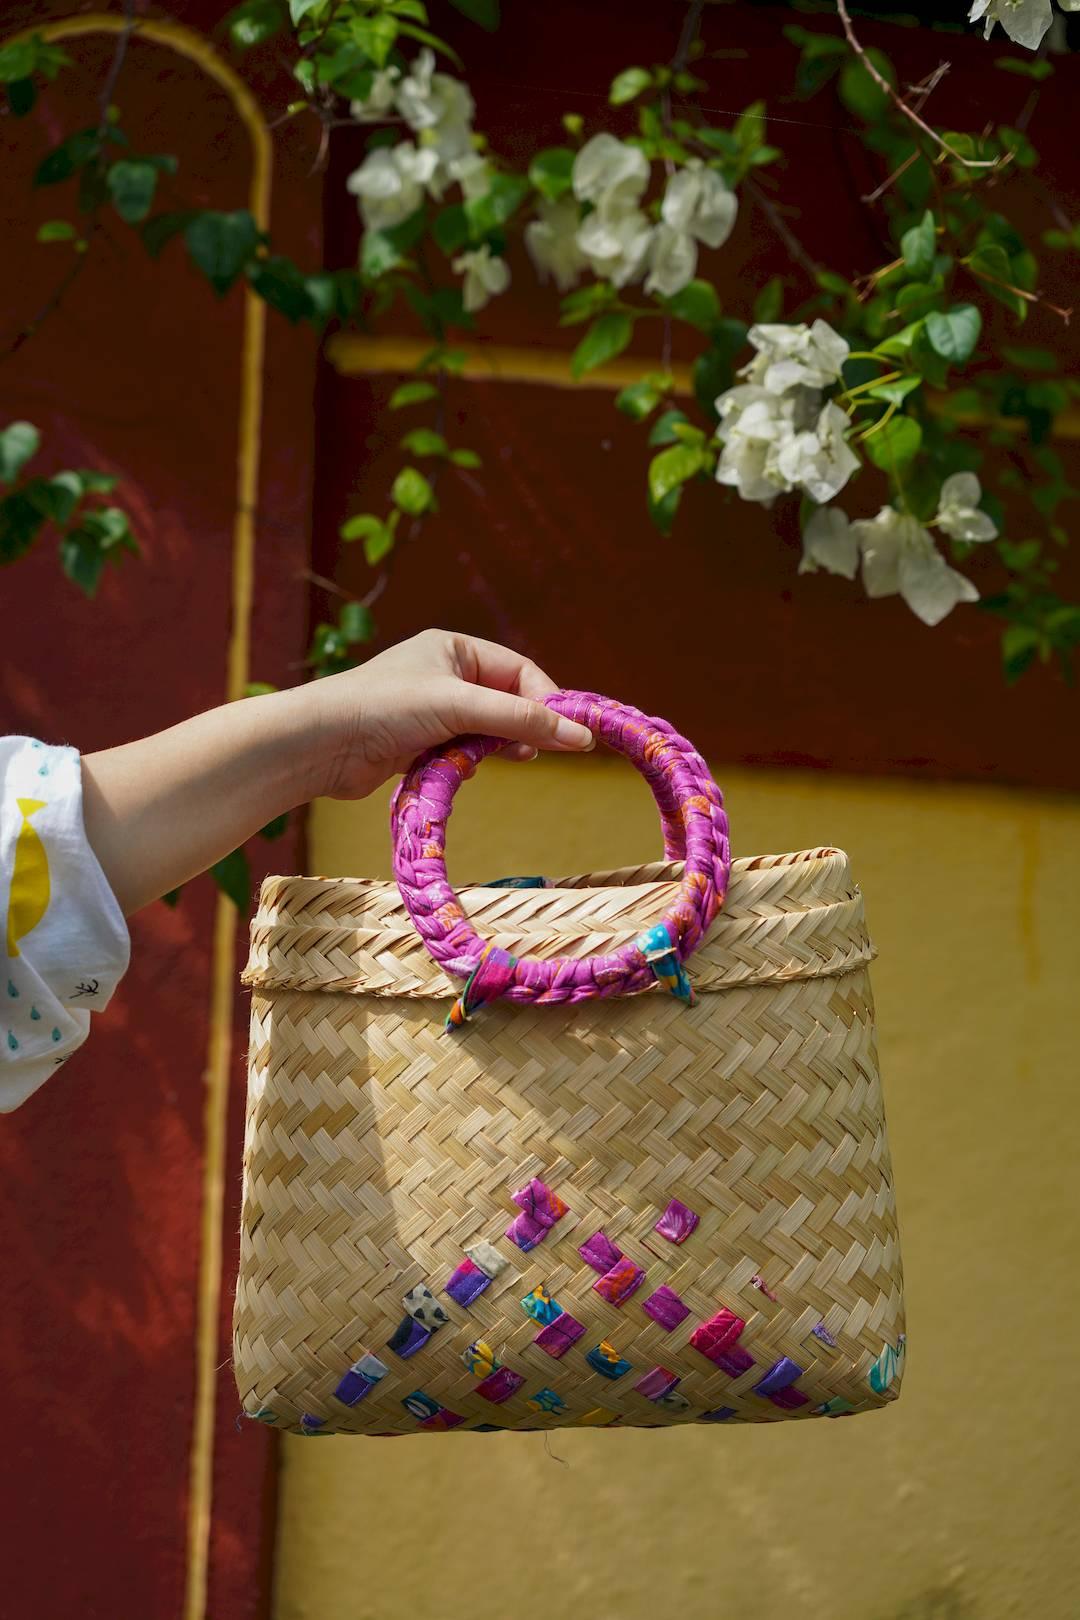 Bamboo handwoven bag made by artisans in Goa